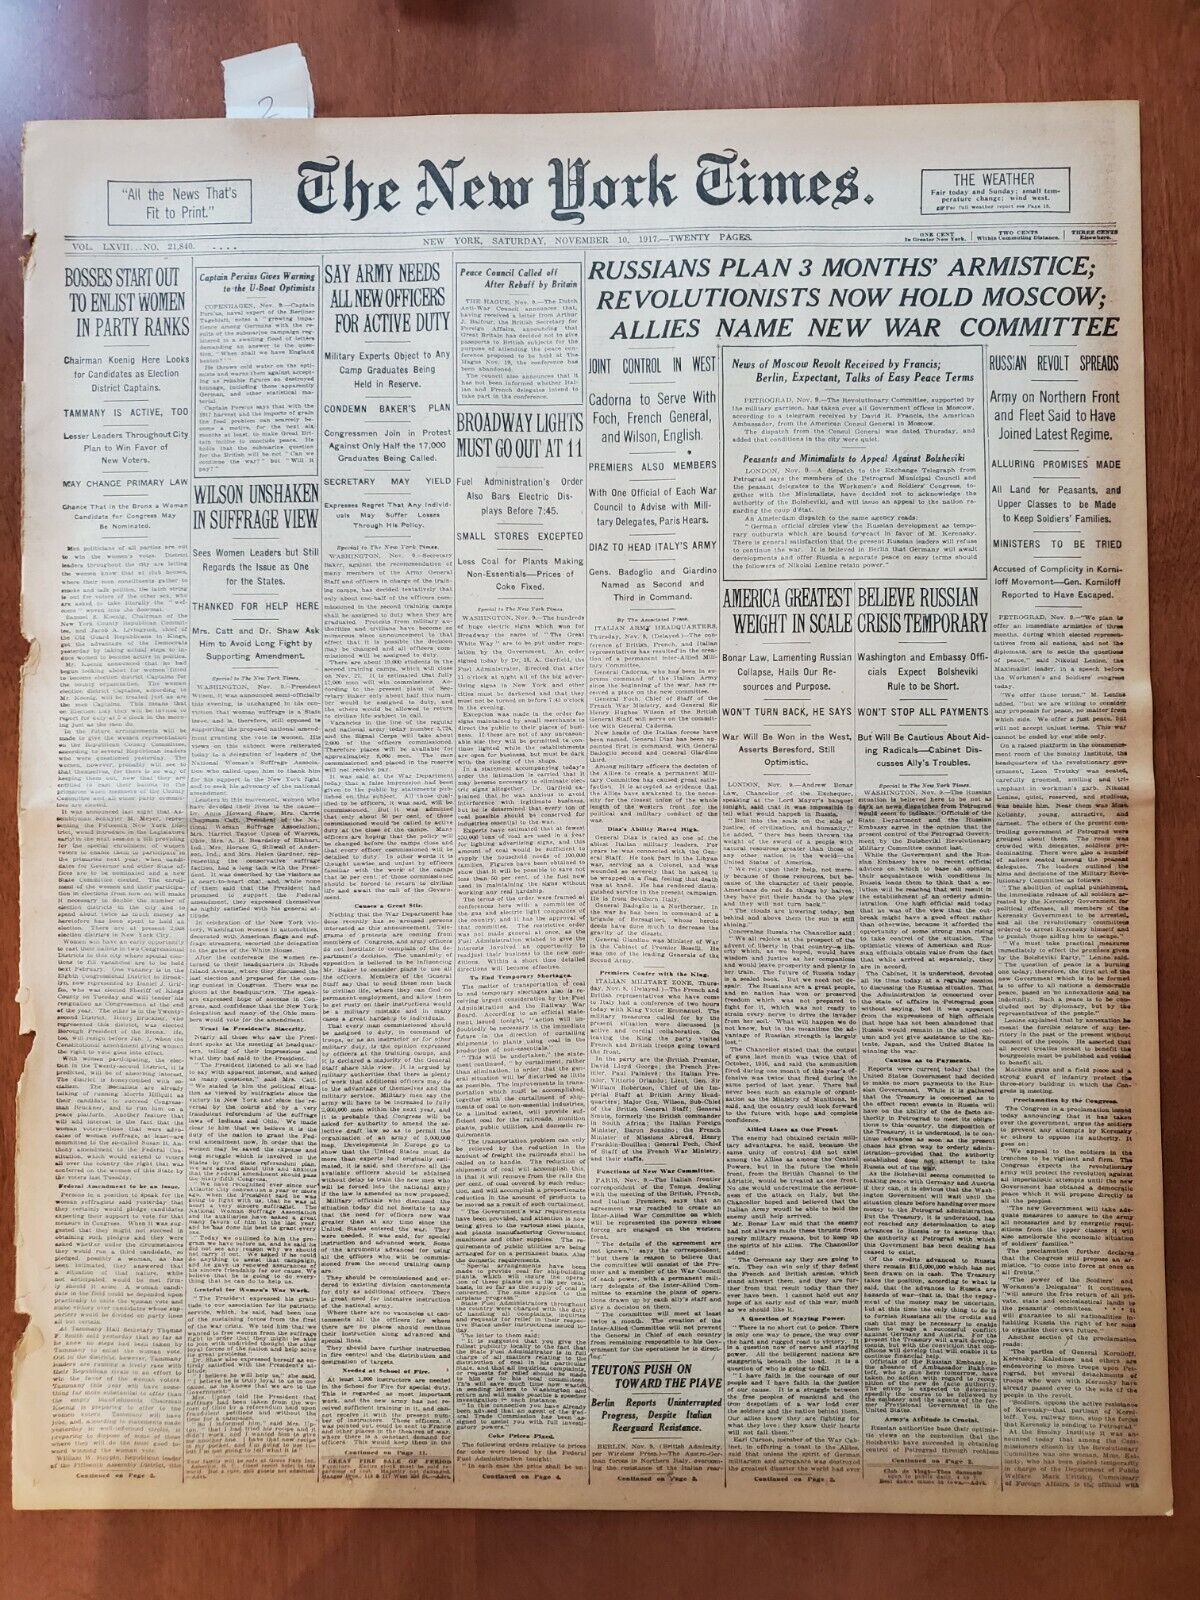 1917 NOVEMBER 10 NEW YORK TIMES - REVOLUTIONISTS NOW HOLD MOSCOW - NT 8065